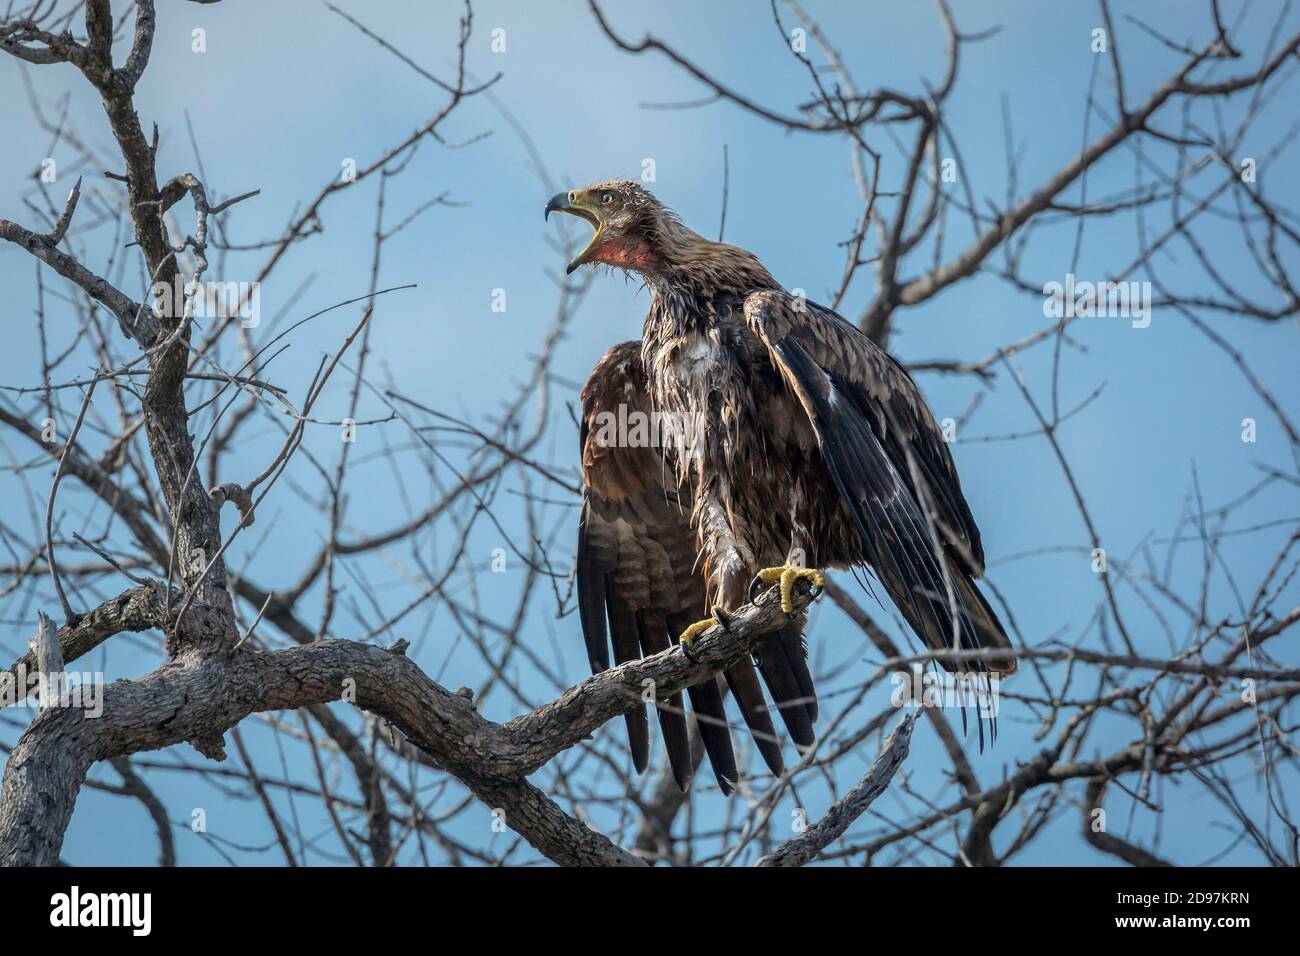 Tawny Eagle calling after bath in Kruger National park, South Africa ; Specie Aquila rapax family of Accipitridae Stock Photo